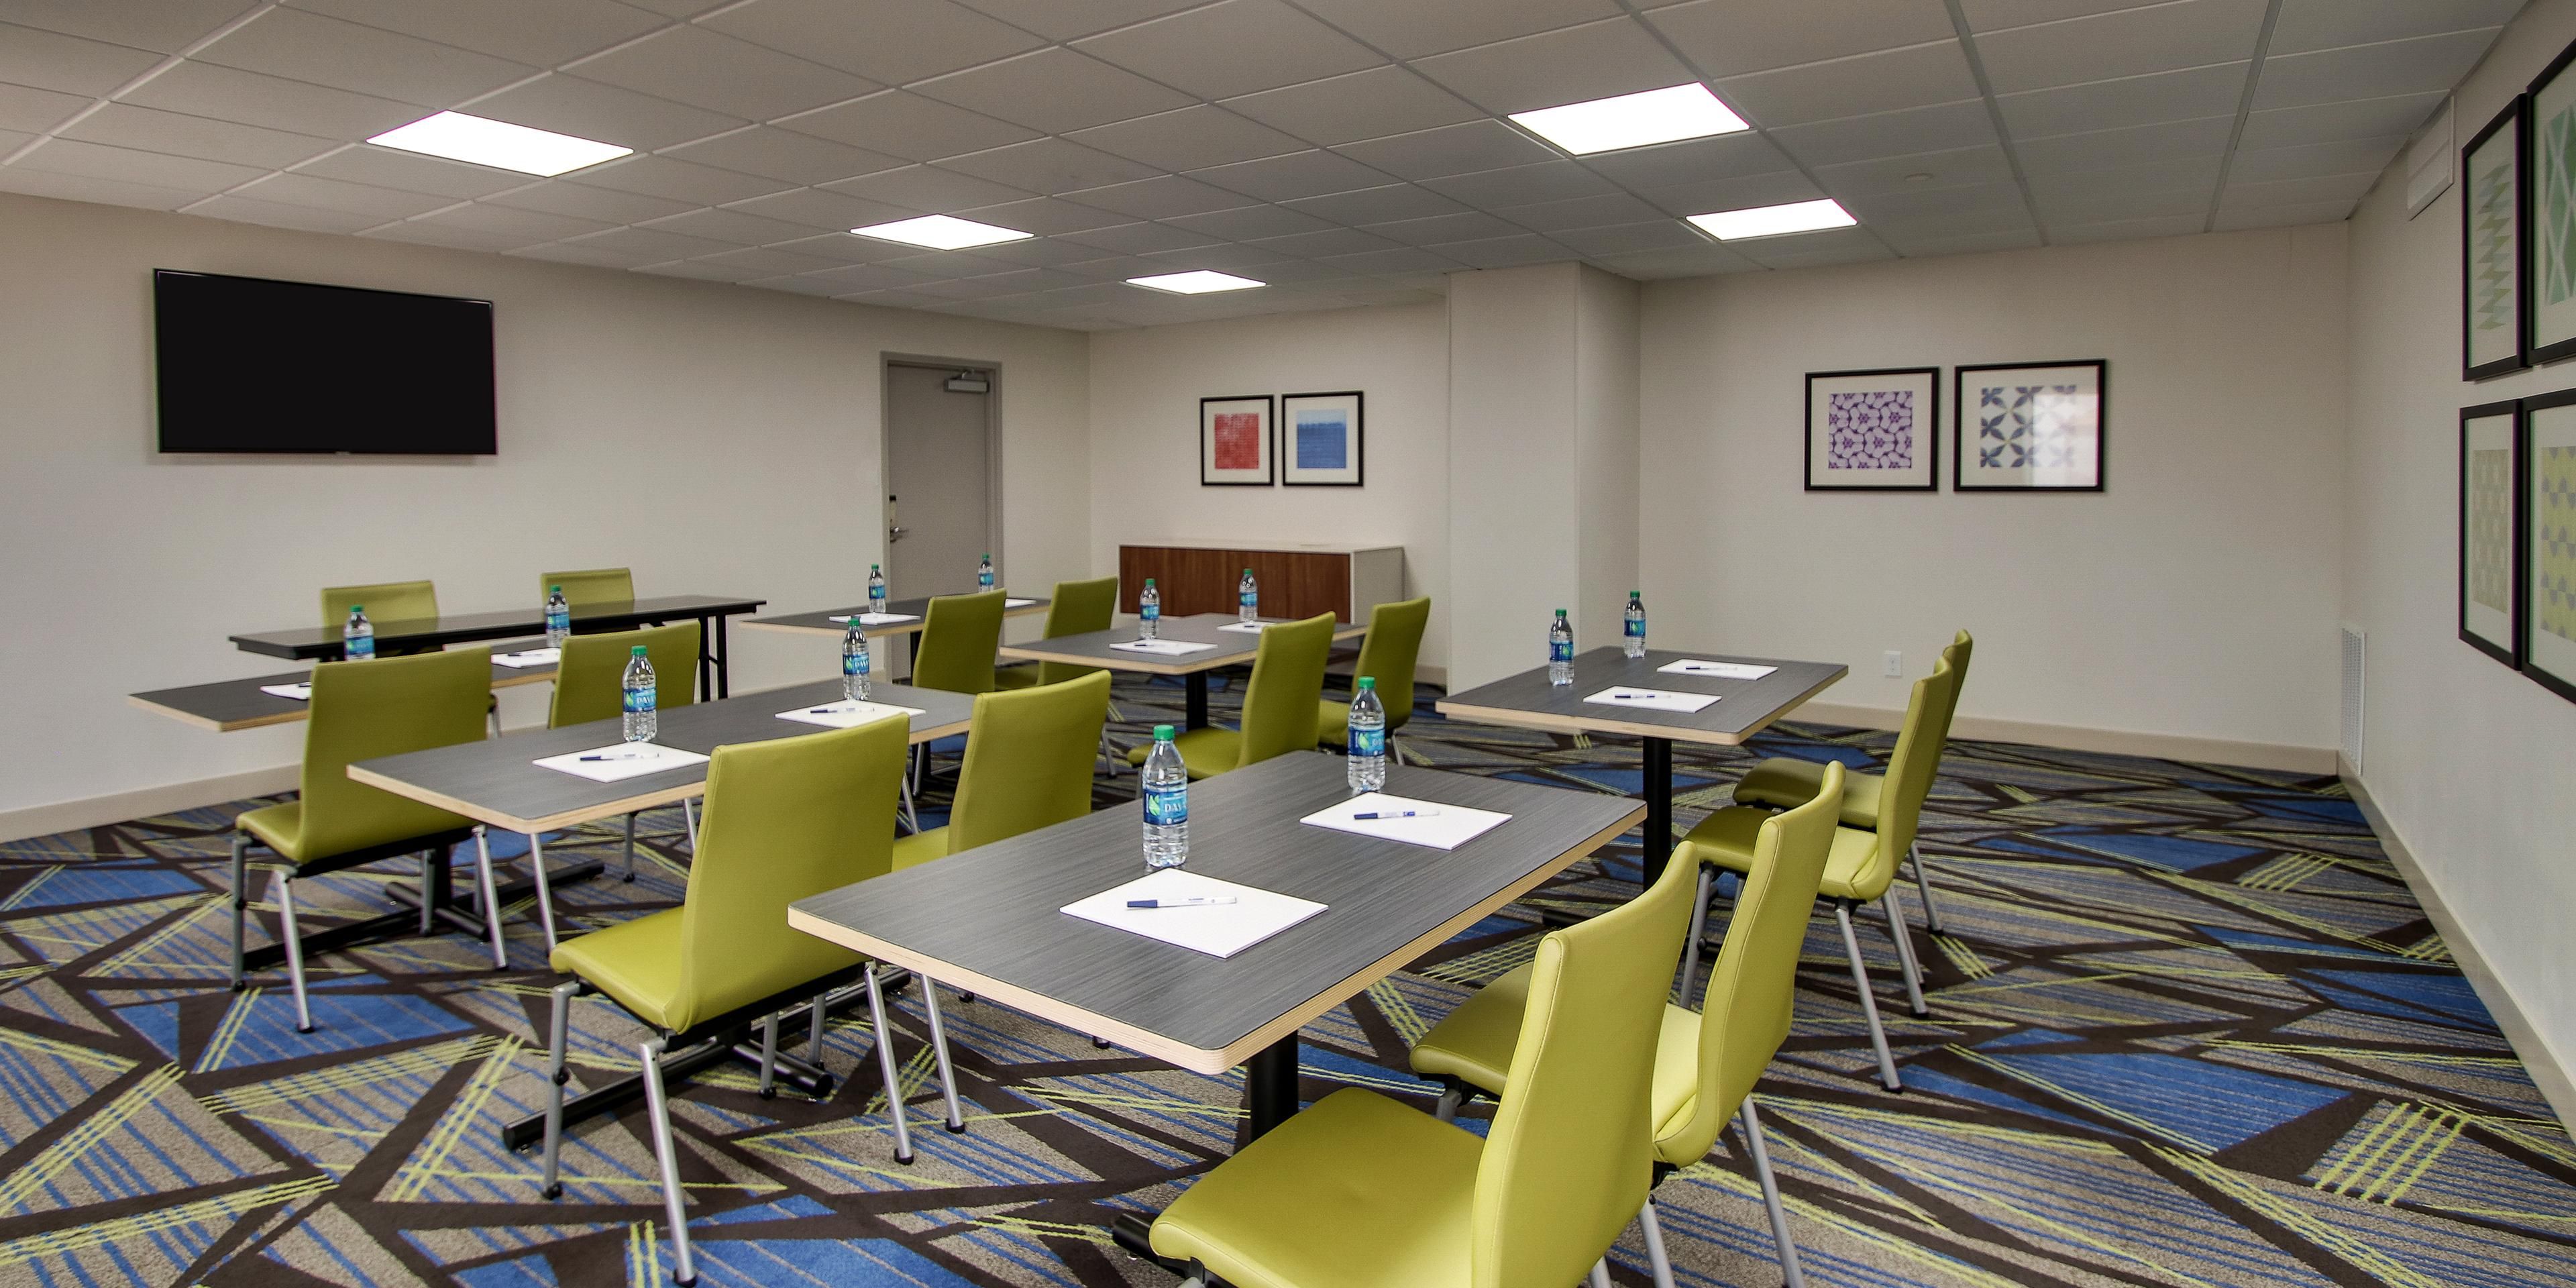 With over 500 sq ft of meeting space, let our hotel host your next corporate meeting, family reunion or bridal shower.